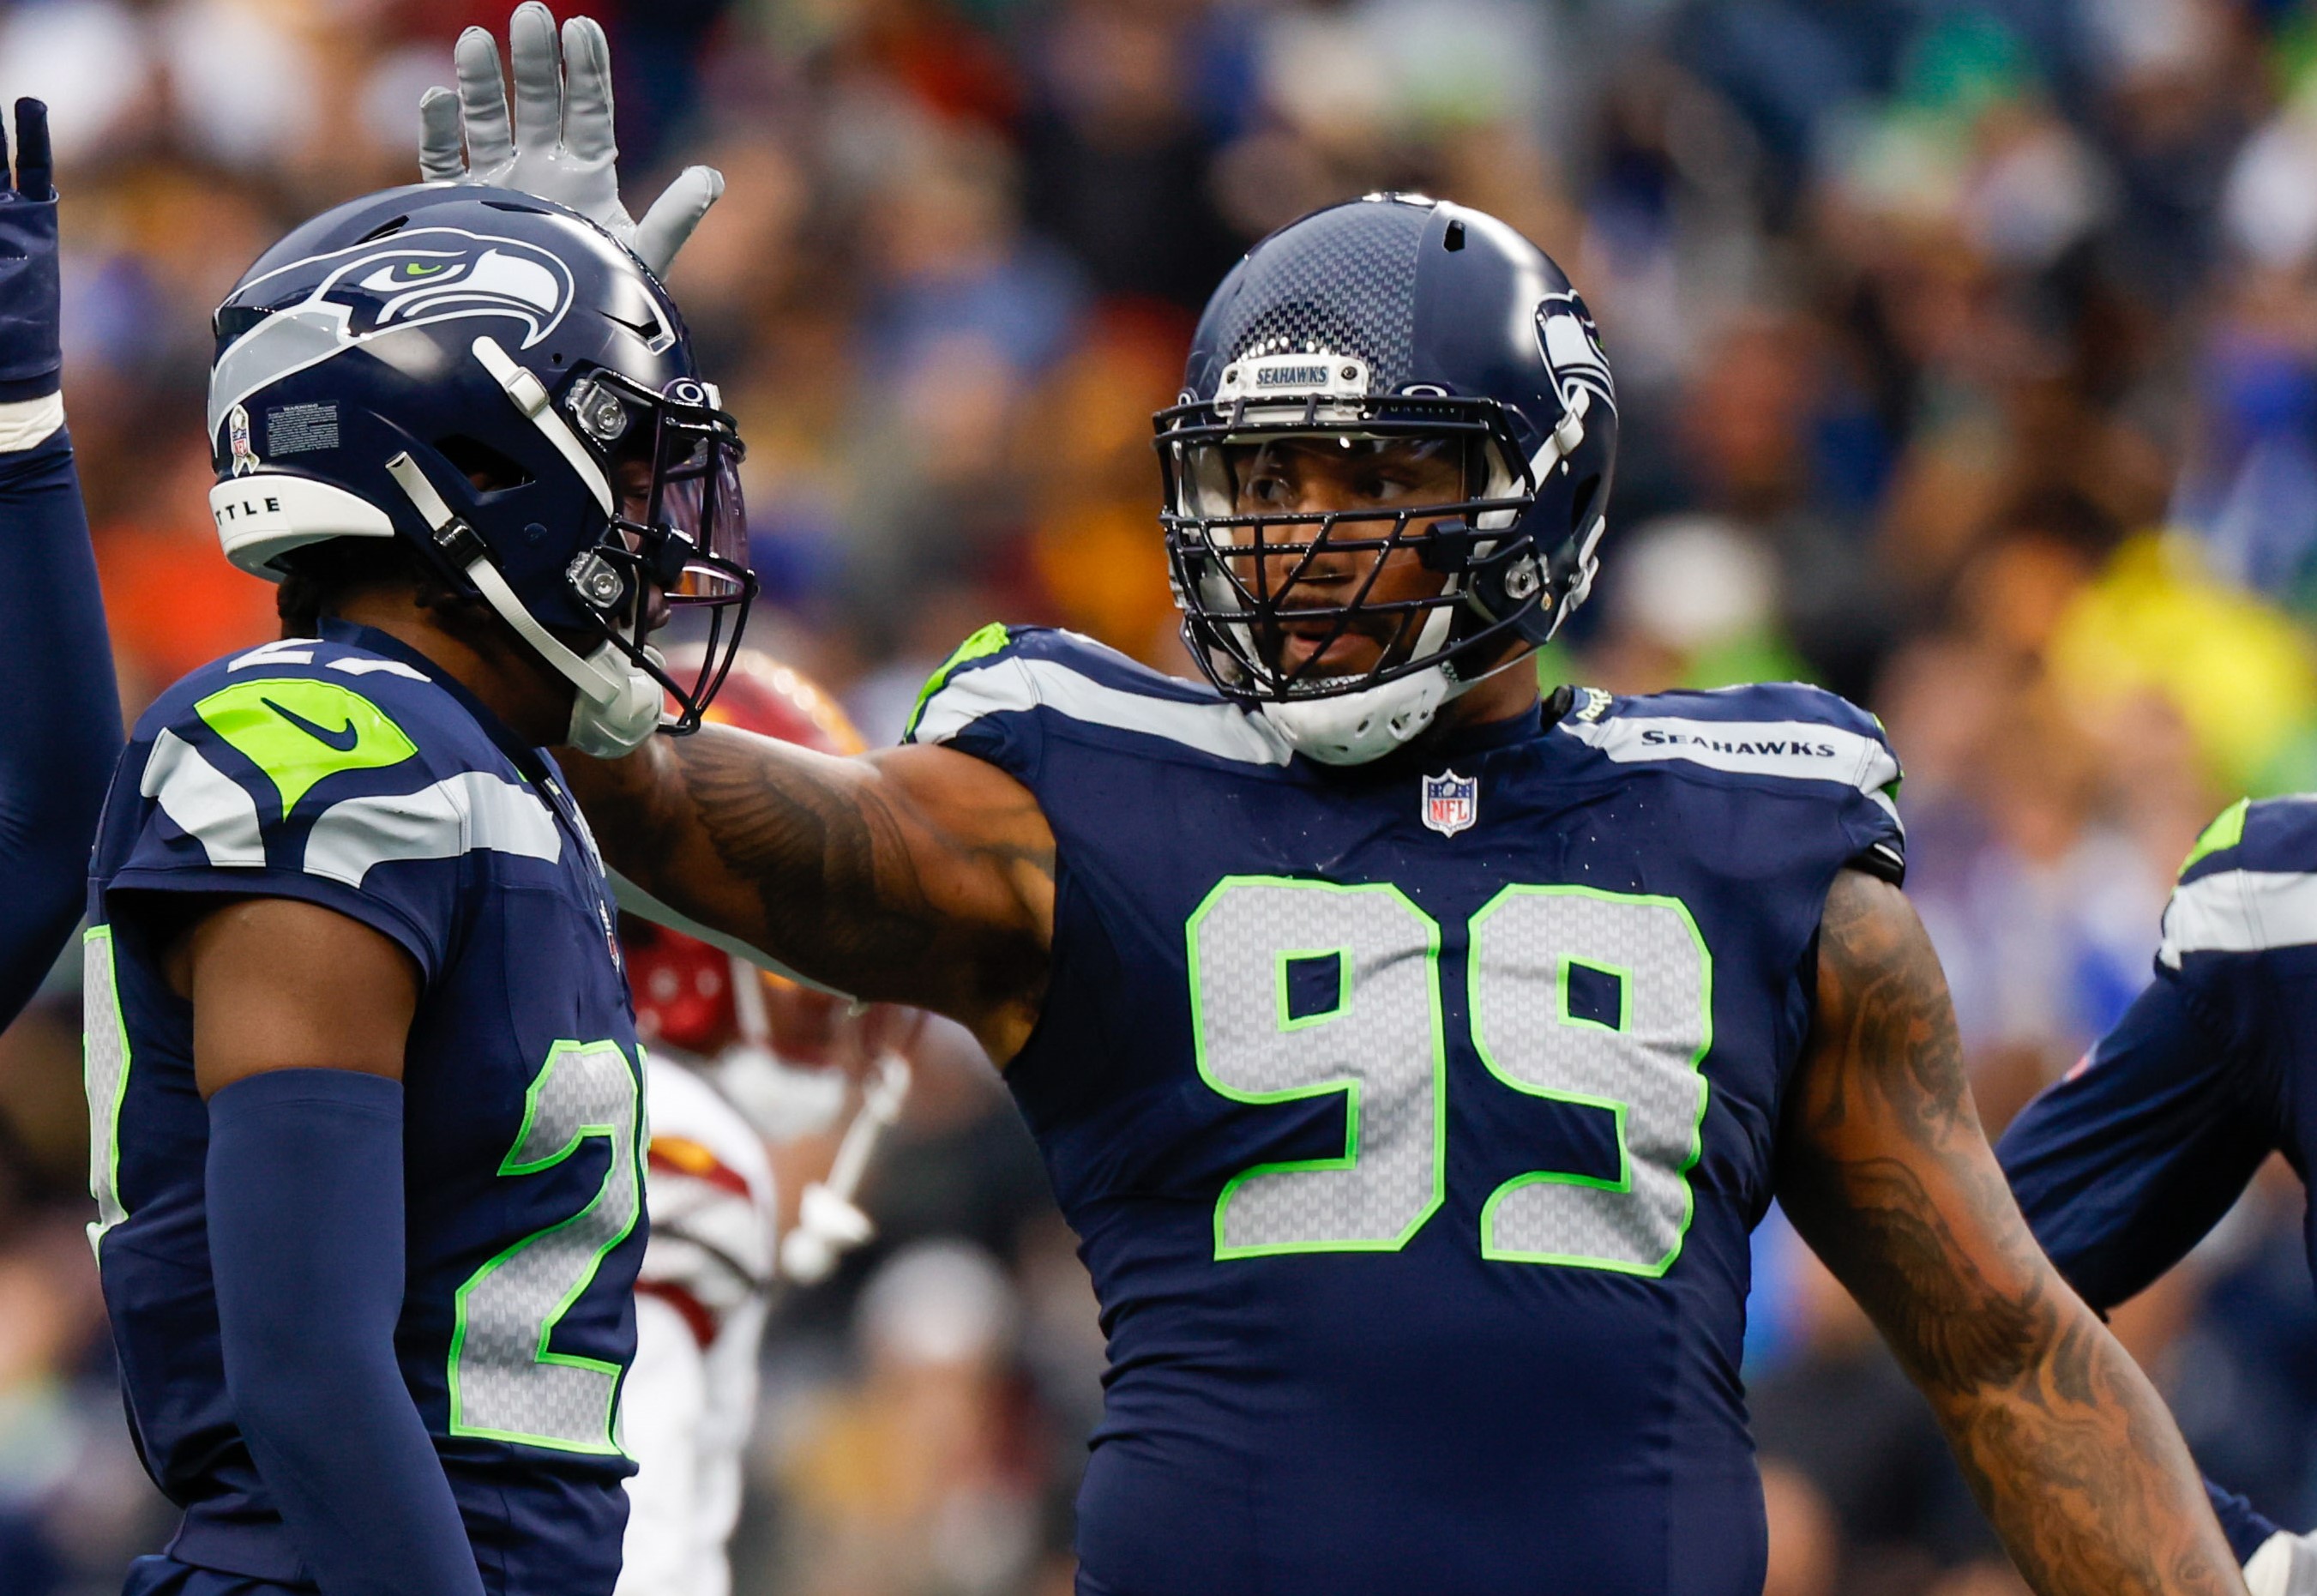 Seattle Seahawks cornerback Riq Woolen (27) and defensive end Leonard Williams (99) celebrate following a play against the Washington Commanders during the second quarter at Lumen Field.